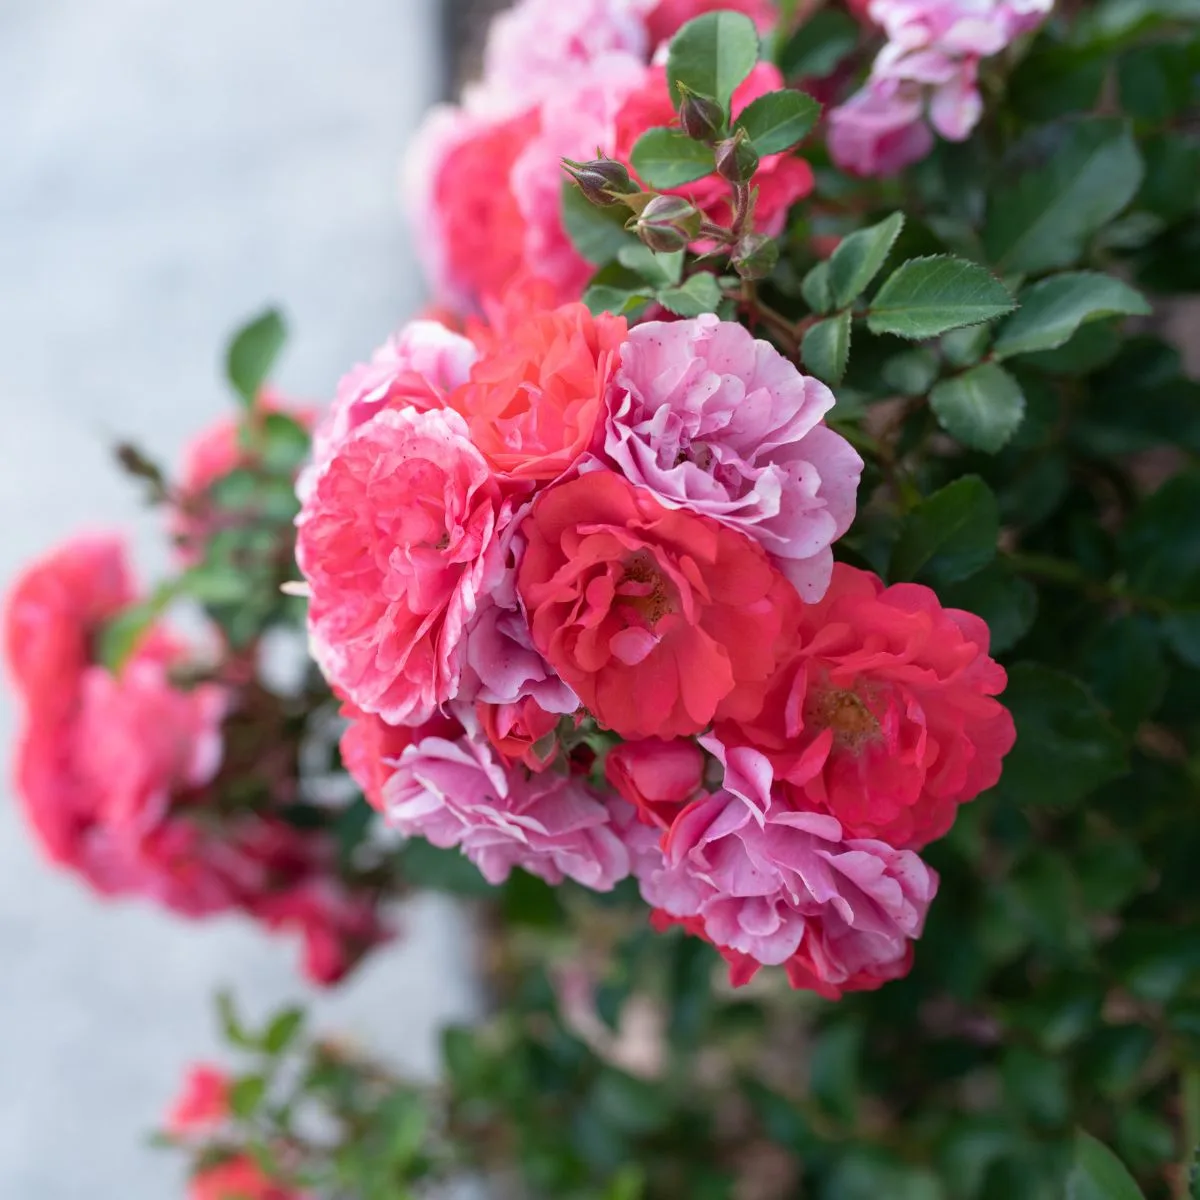 Red and pink bicolor drift roses.